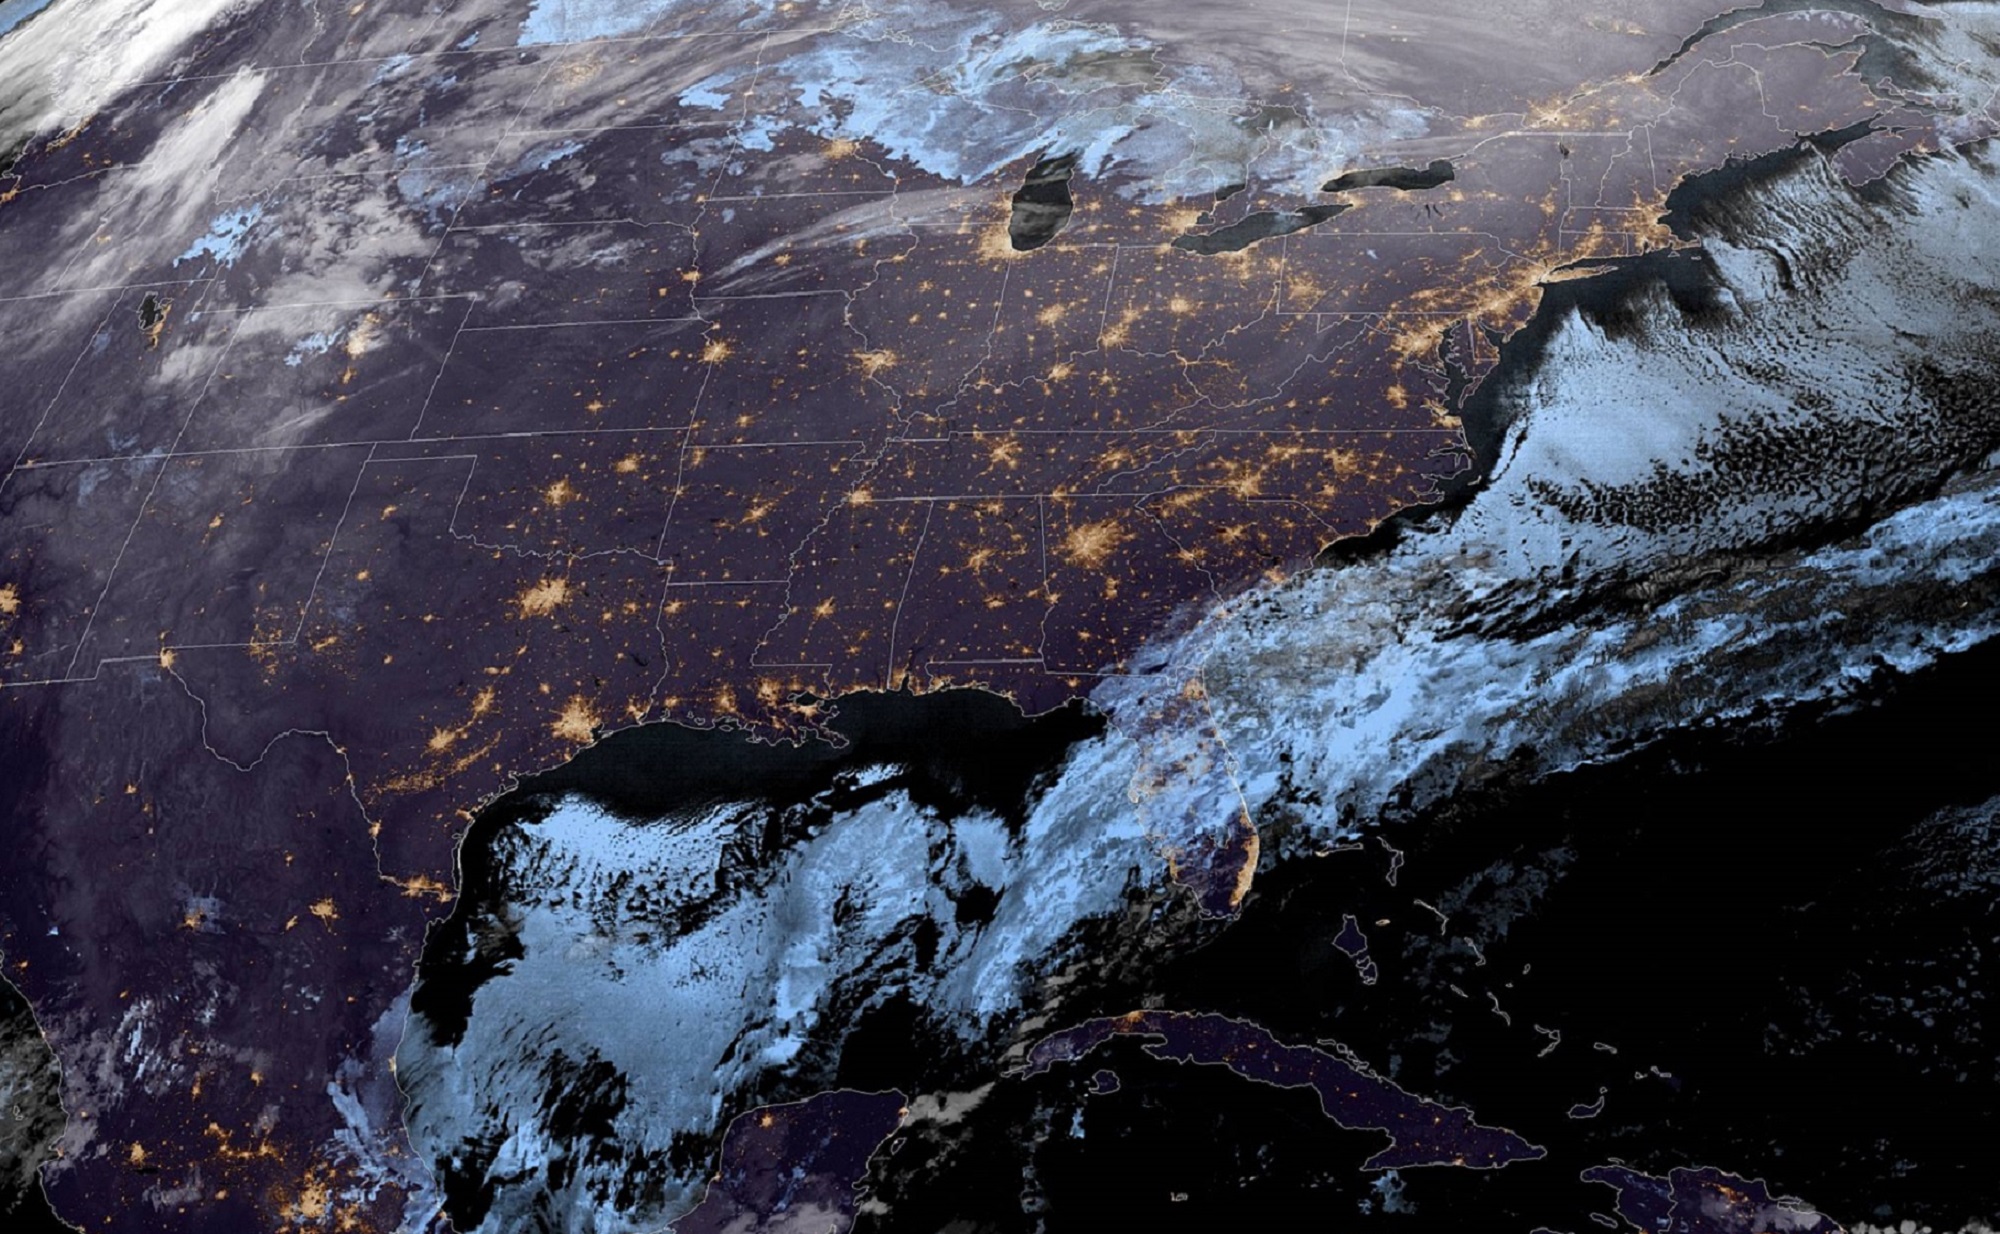 Winter Storm Landon moving off the Gulf Coast on the night of February 3 on a weather radar satellite image